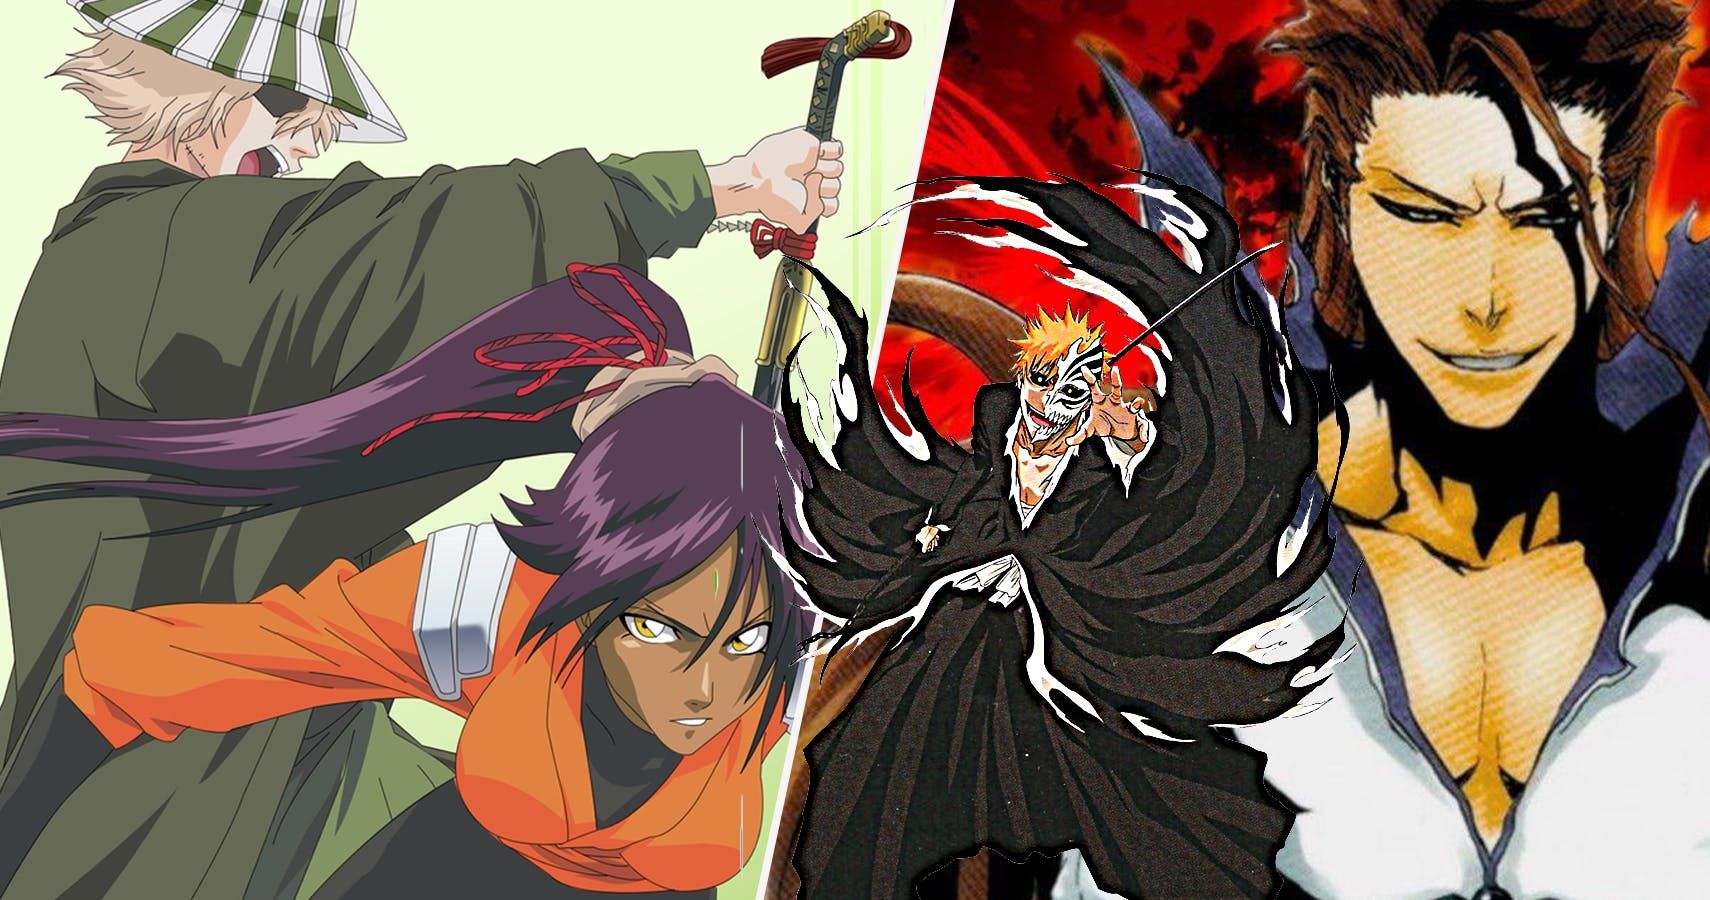 A collage of Bleach's Soul Reapers in action